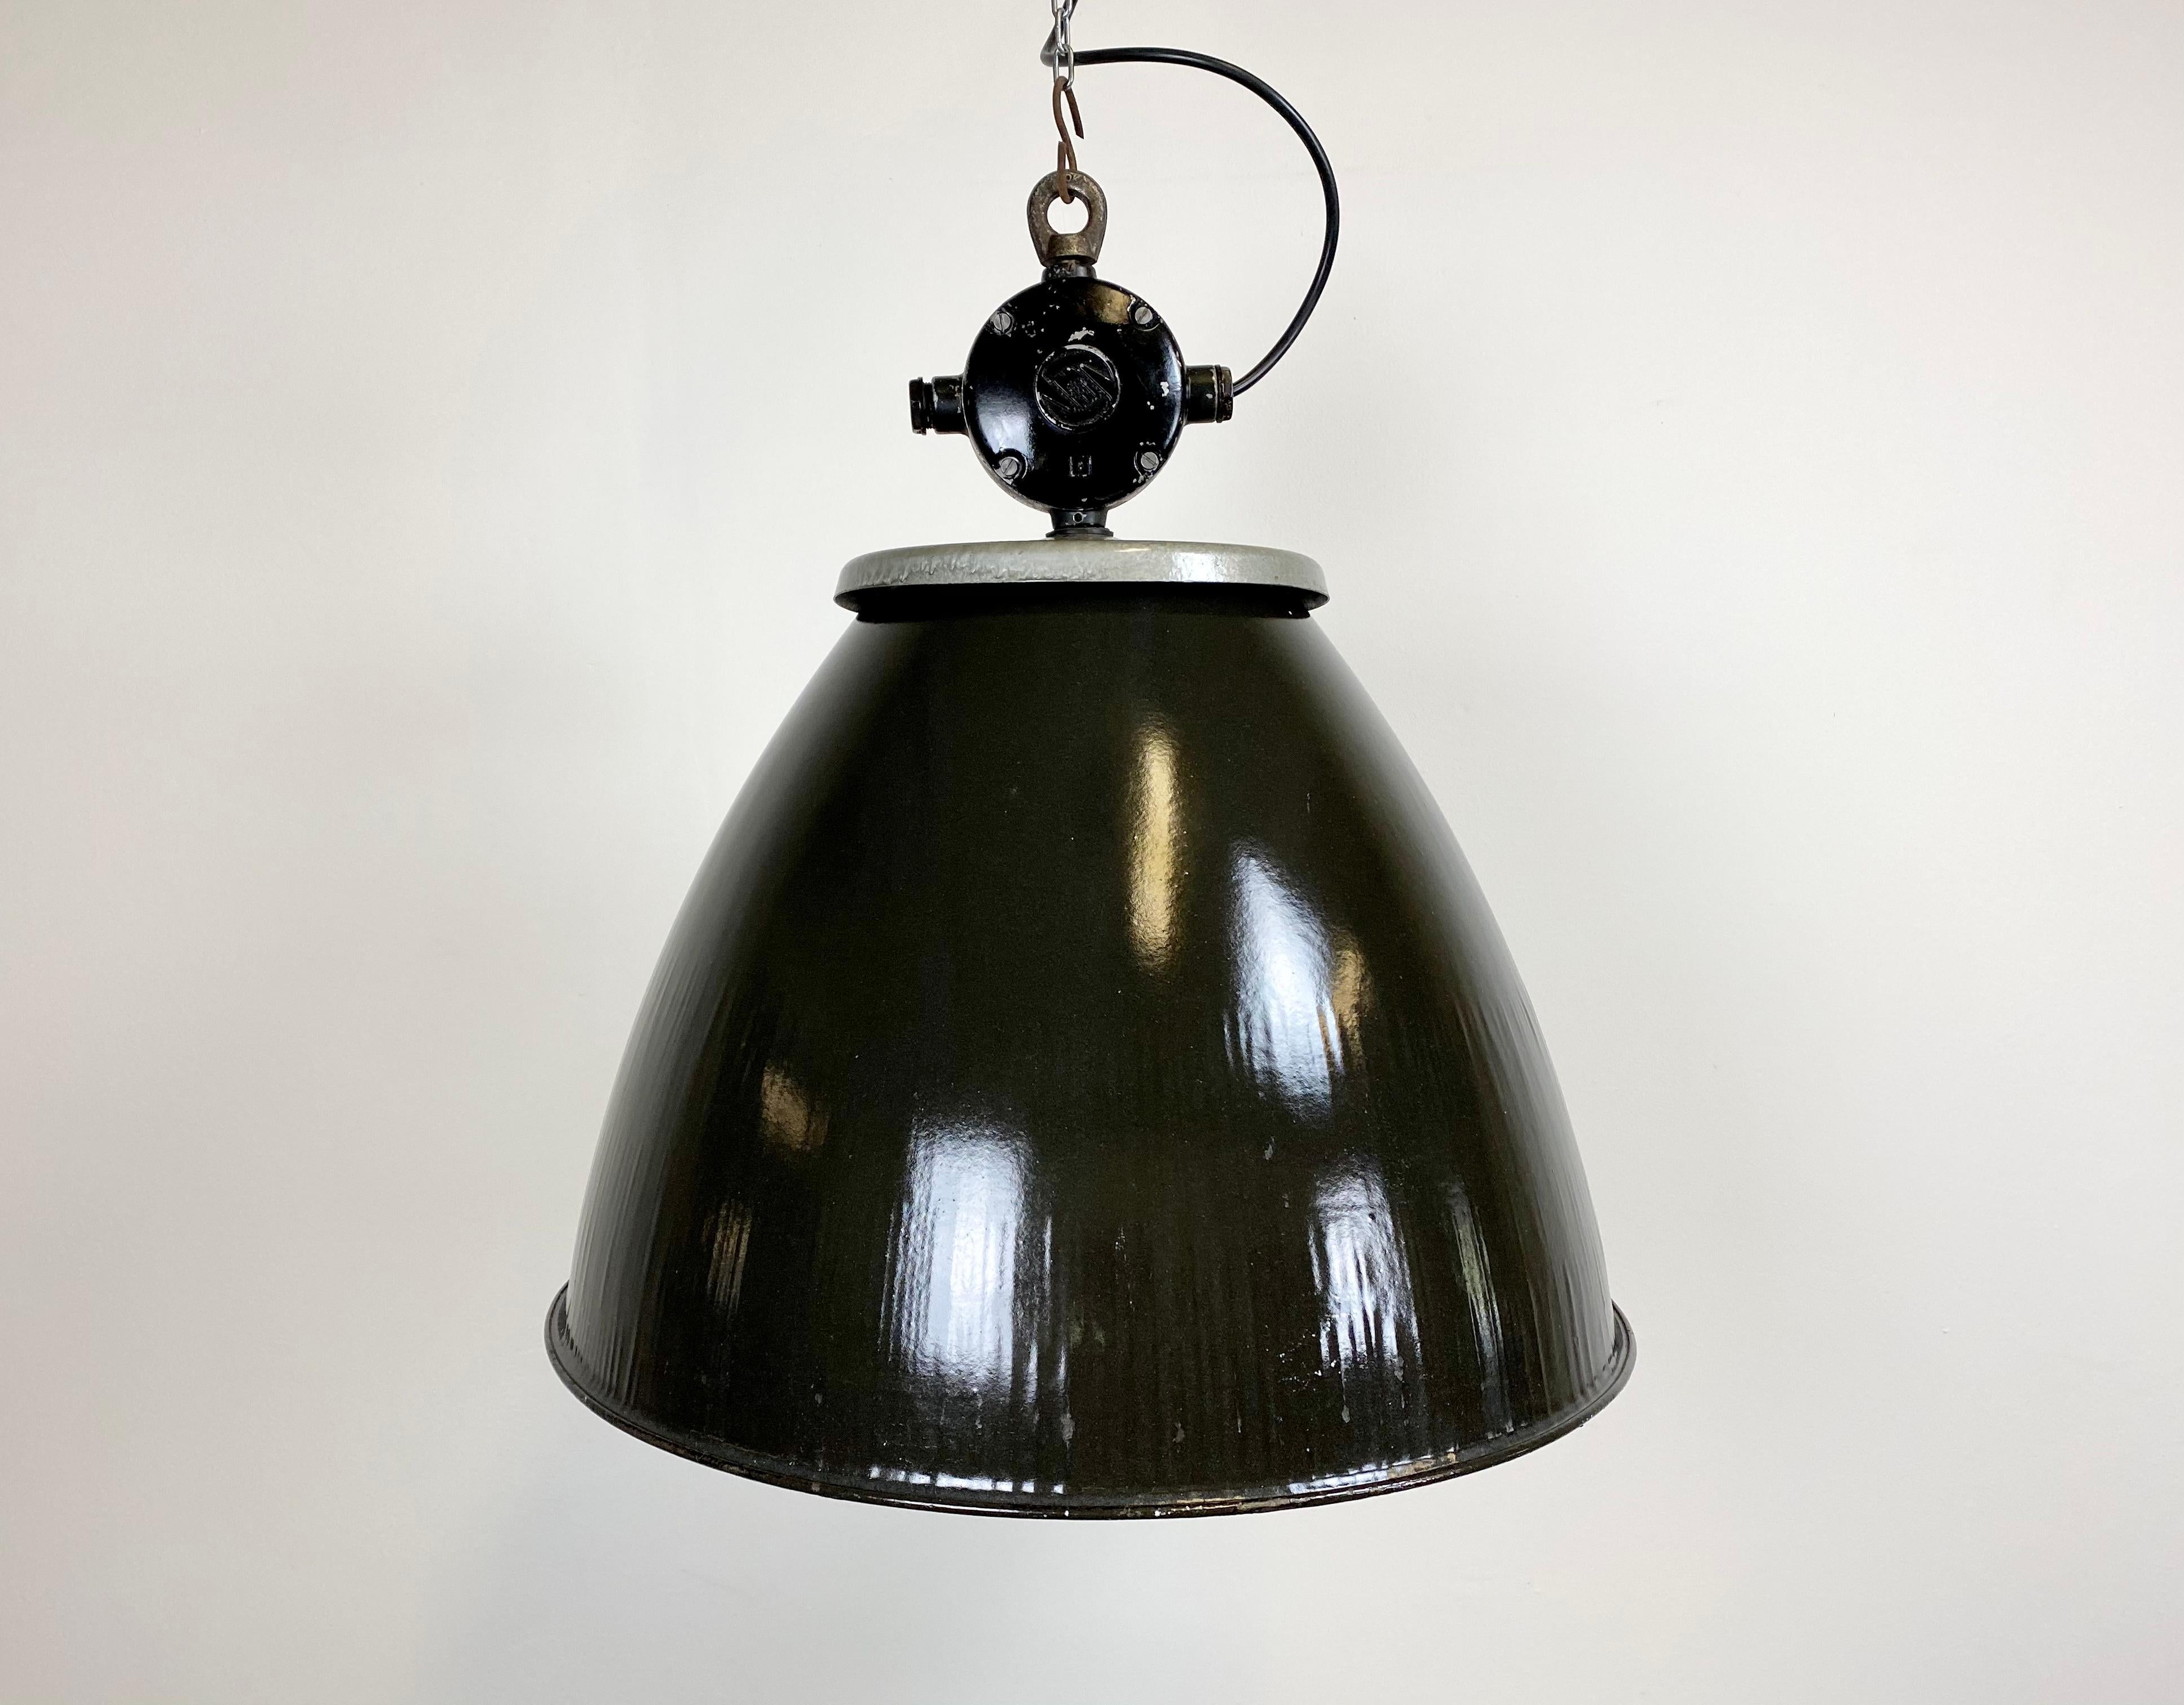 Industrial enamel hanging lamp made by Elektrosvit in former Czechoslovakia during the 1960s. It features a cast aluminium top, a black enamel shade with white interior. New porcelain socket requires E 27/ E 26 light bulbs. New wire. The lamp weighs